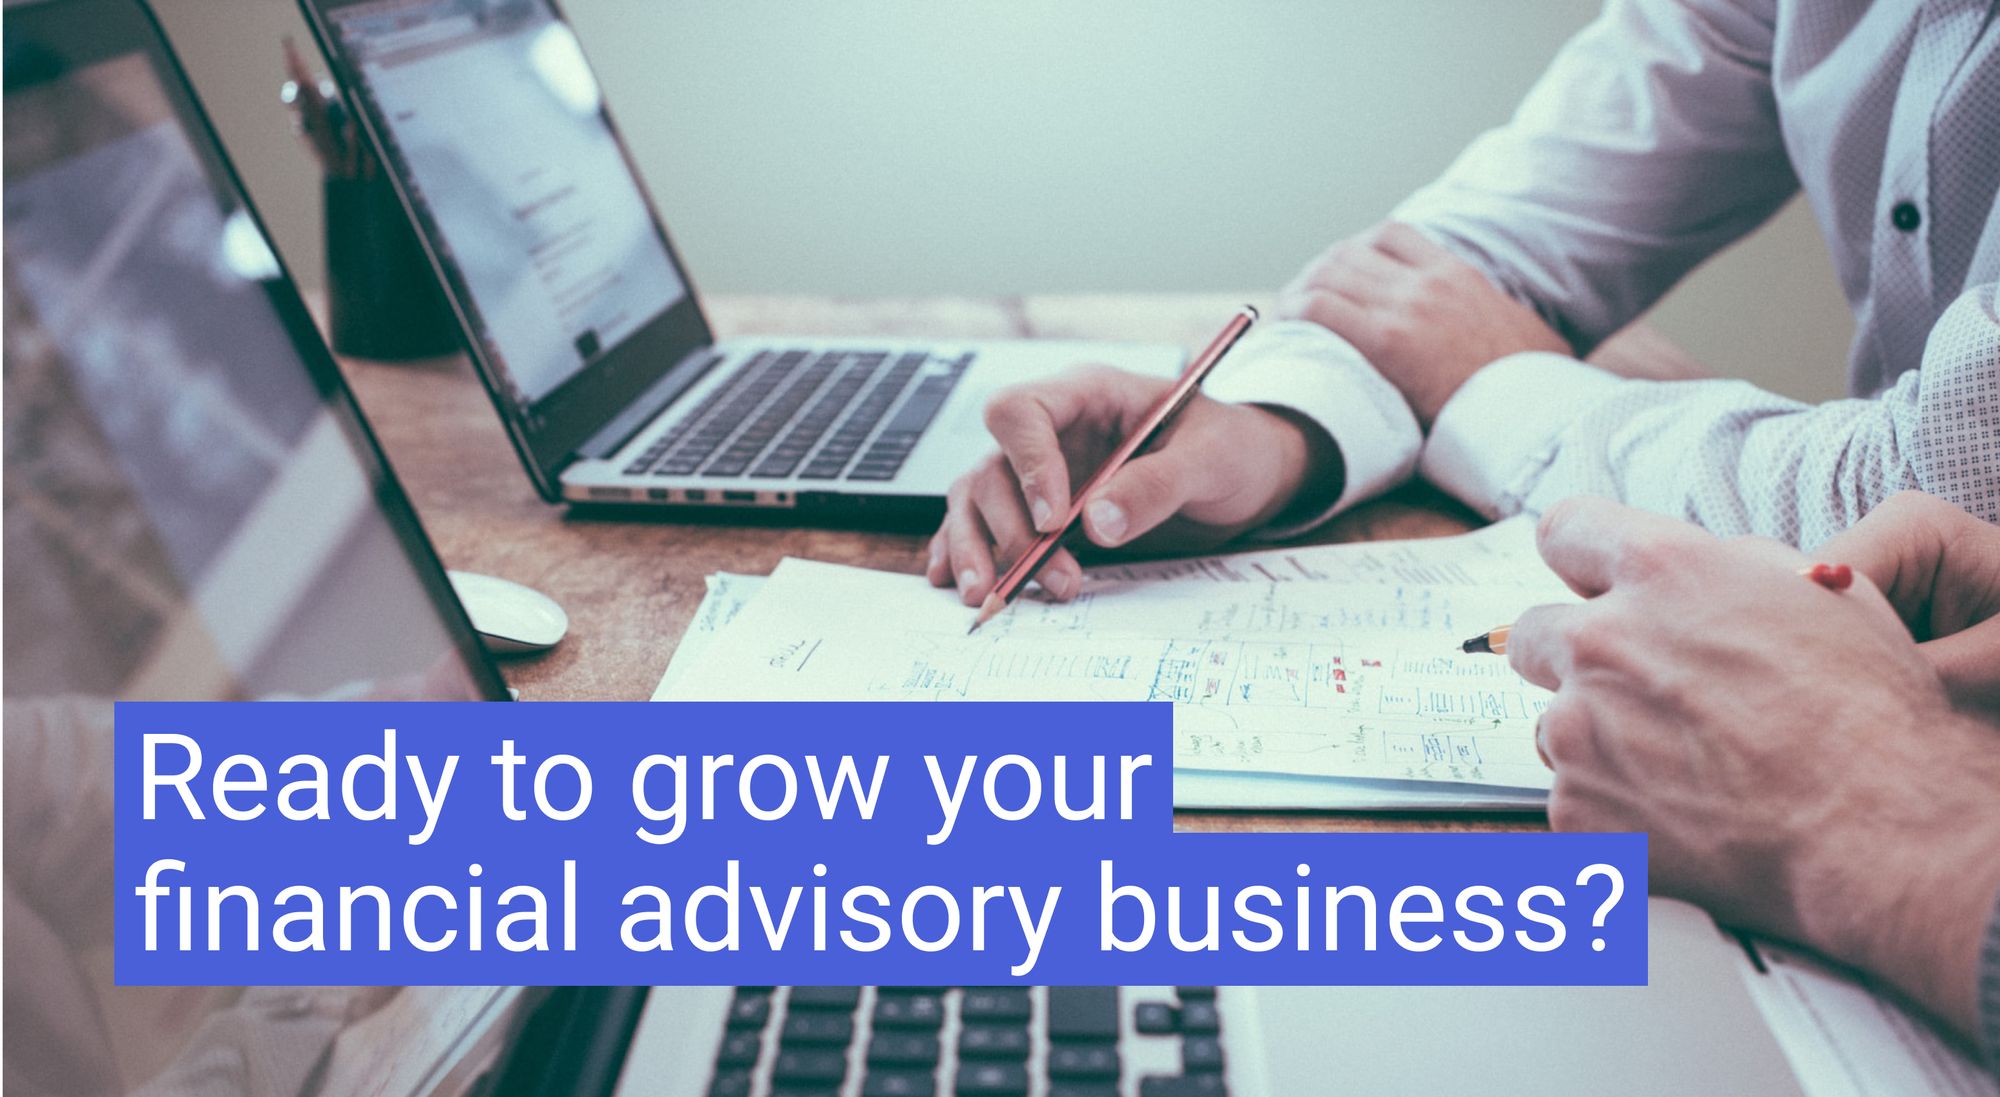 Ready to grow your financial advisory business?